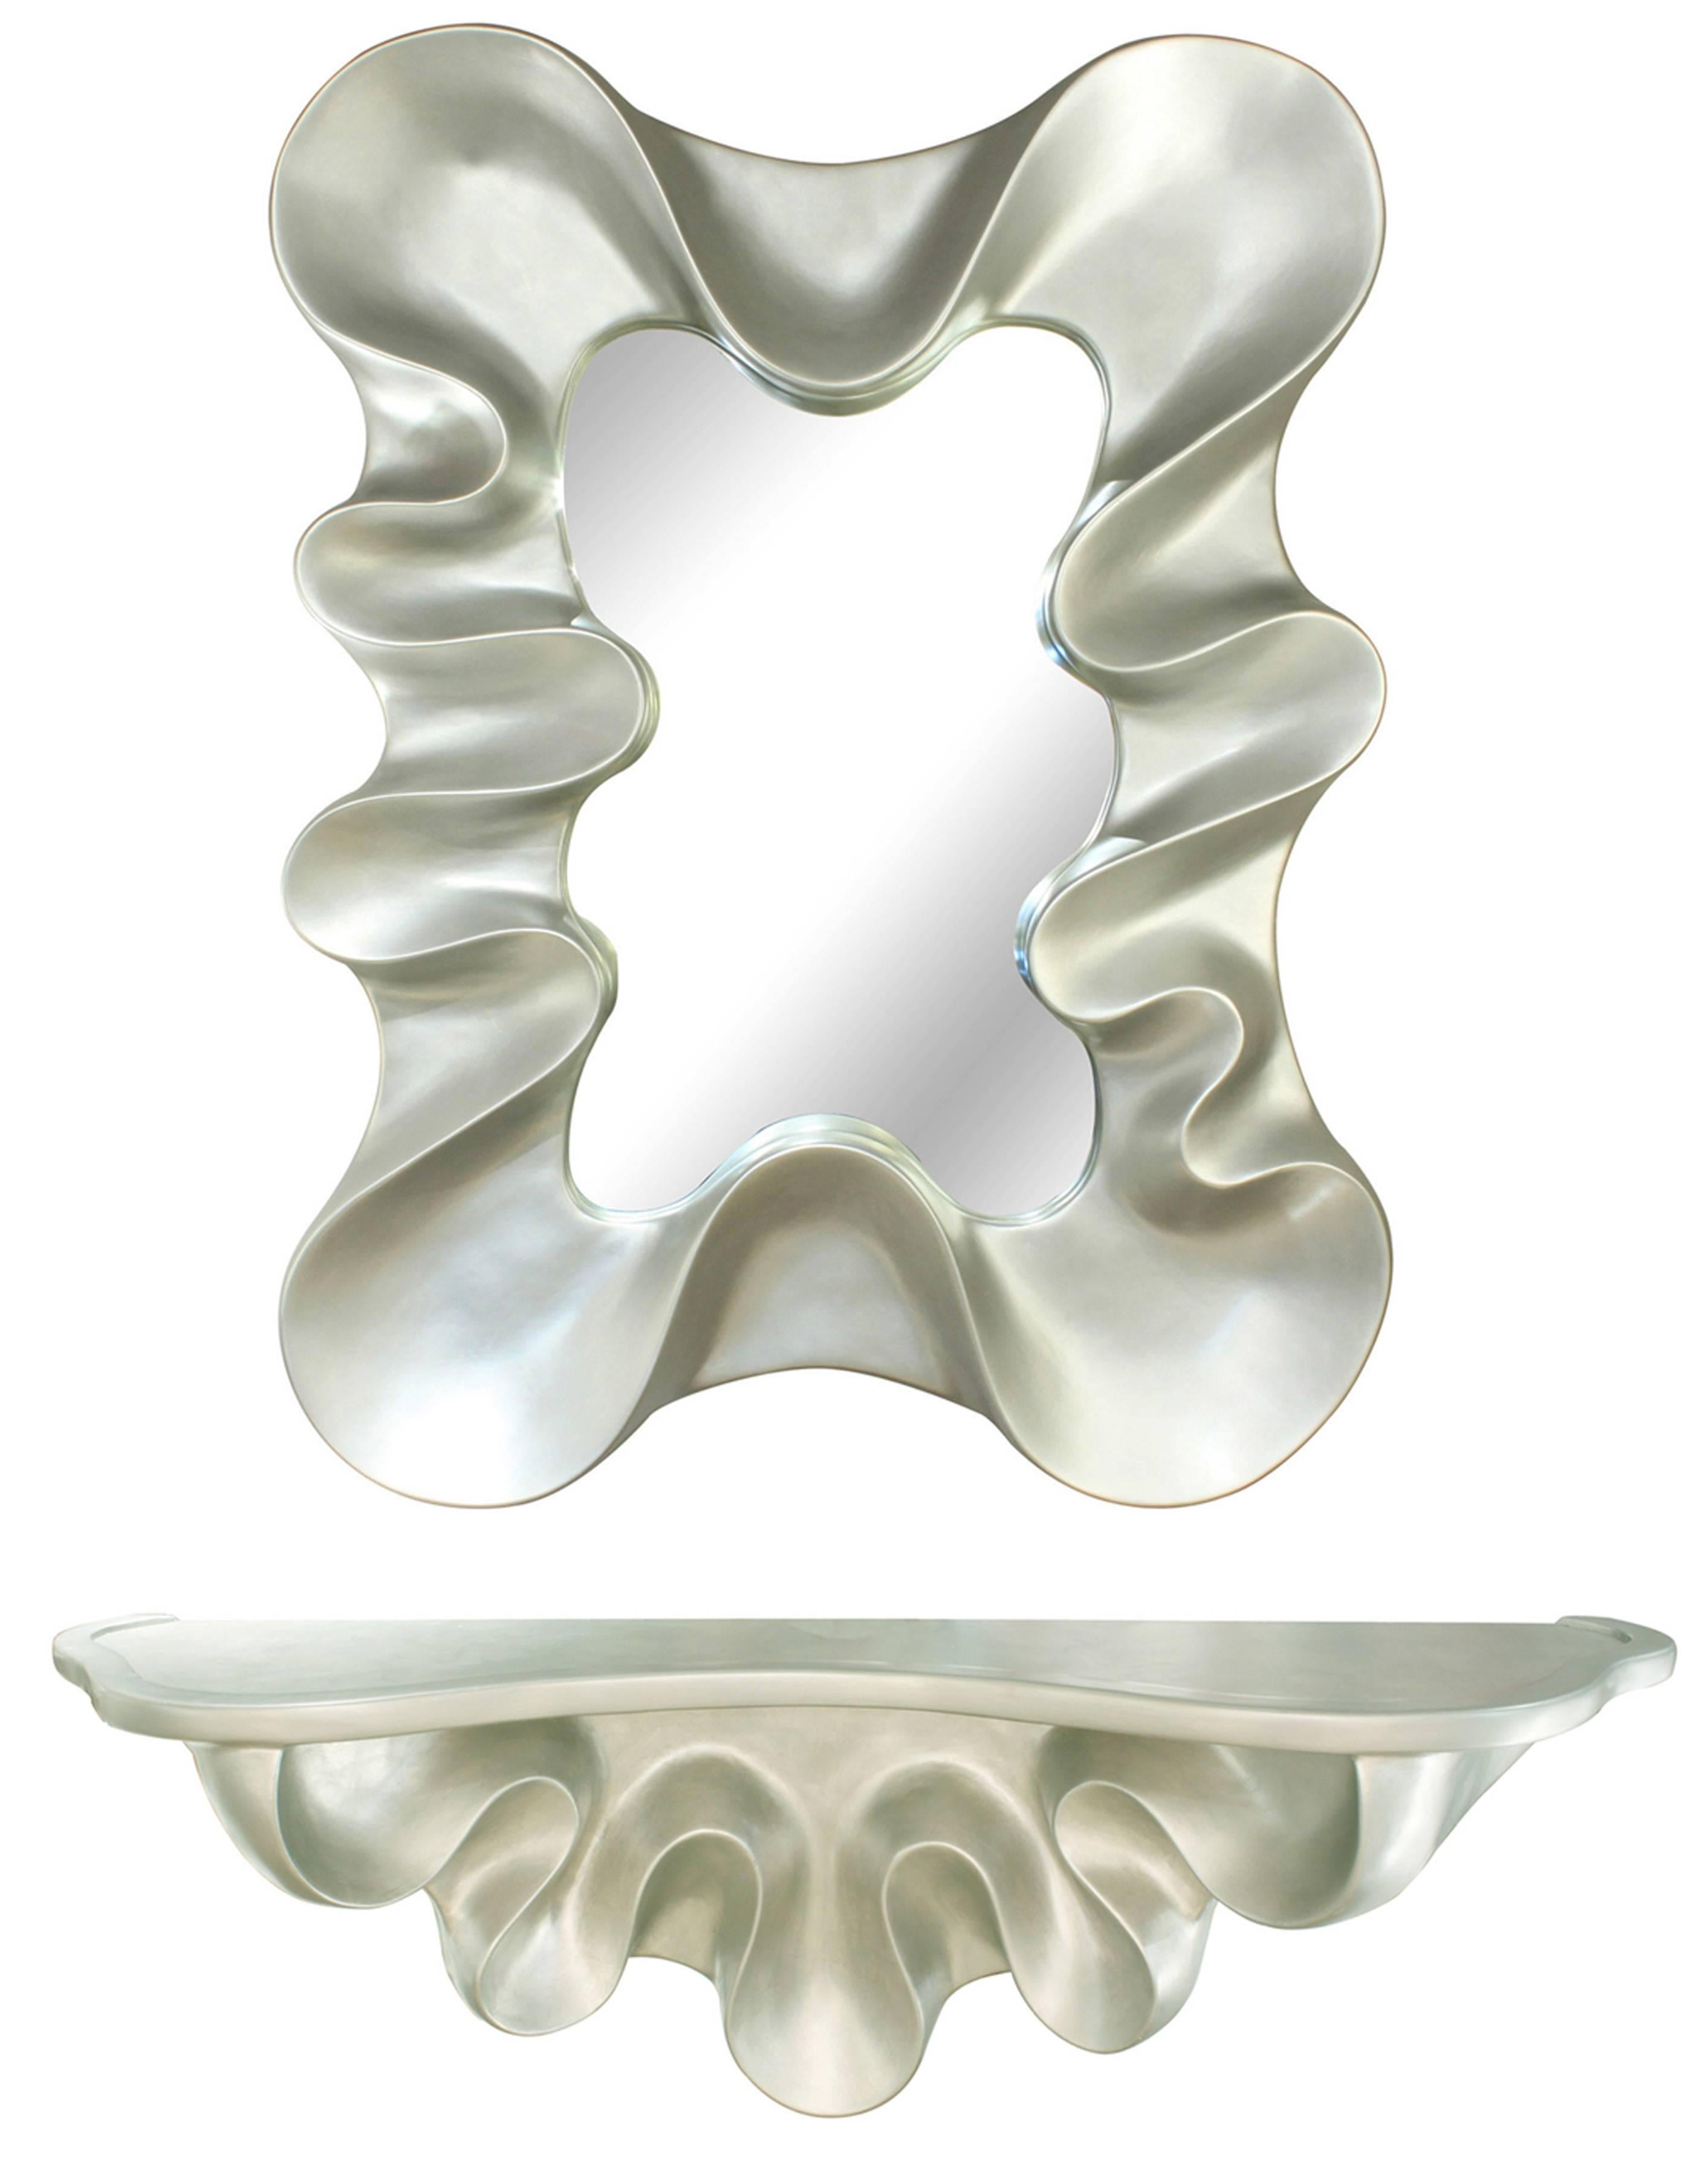 Curvaceous mirror in plaster with silver leaf by Lawrence De Martino, American 2002 (signed and dated on verso). Matching console sold separately.